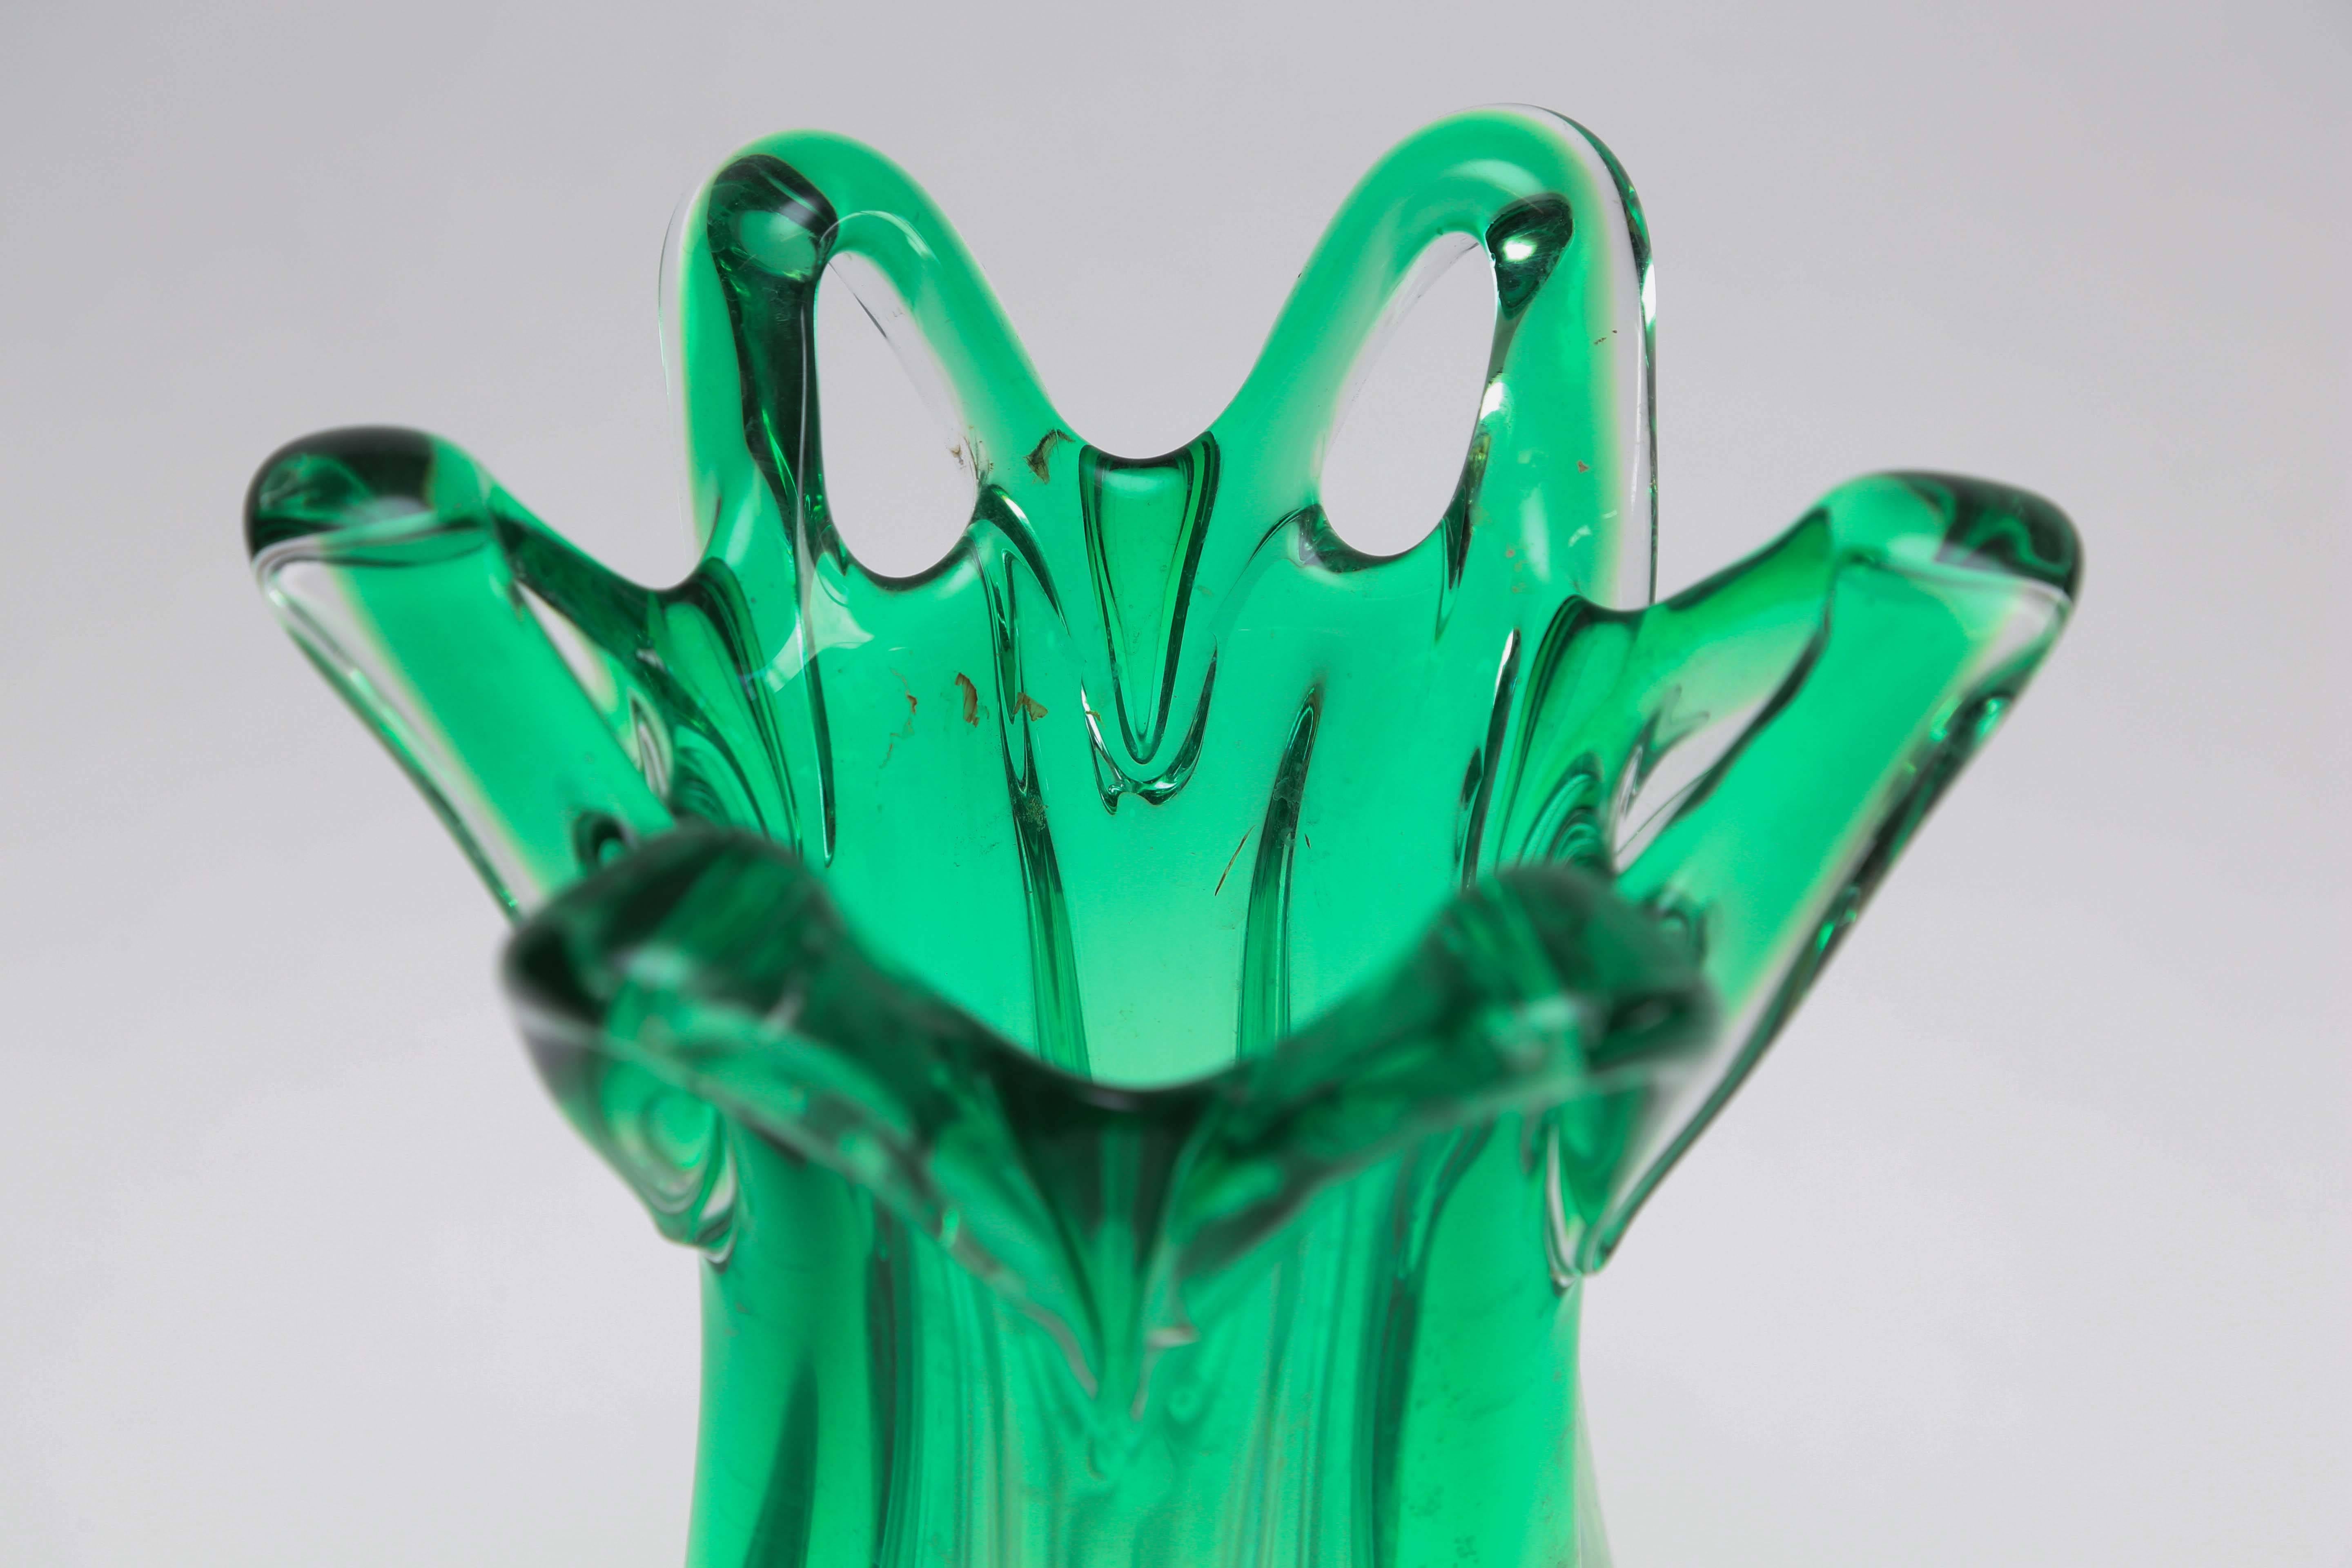 Beautiful ombre effect green Murano glass vase from 1960s, Italy.